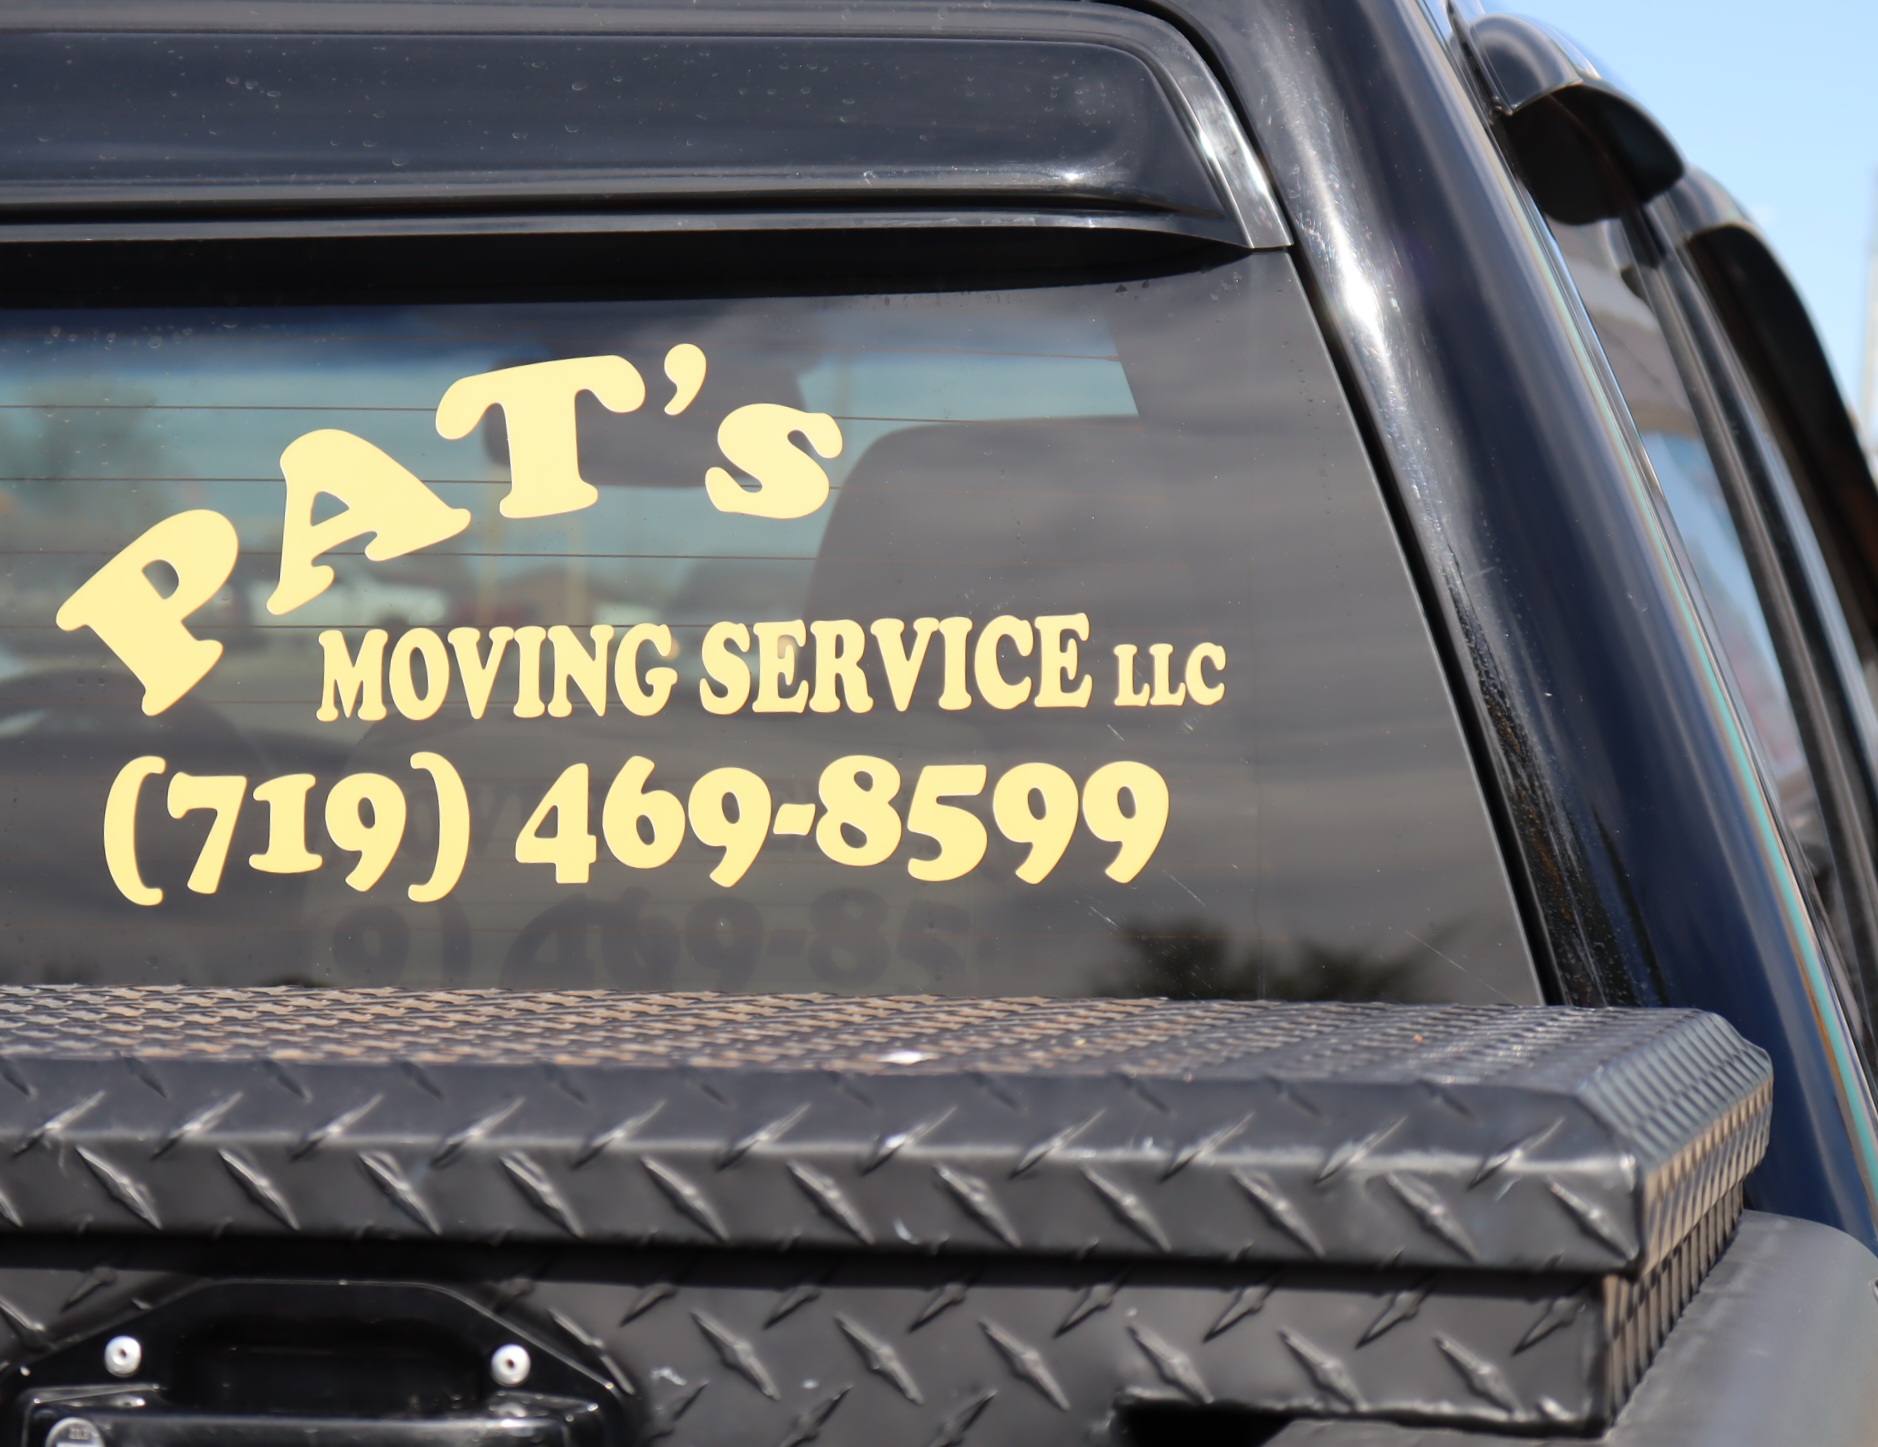 Pat's Moving Service SECO News seconews.org 